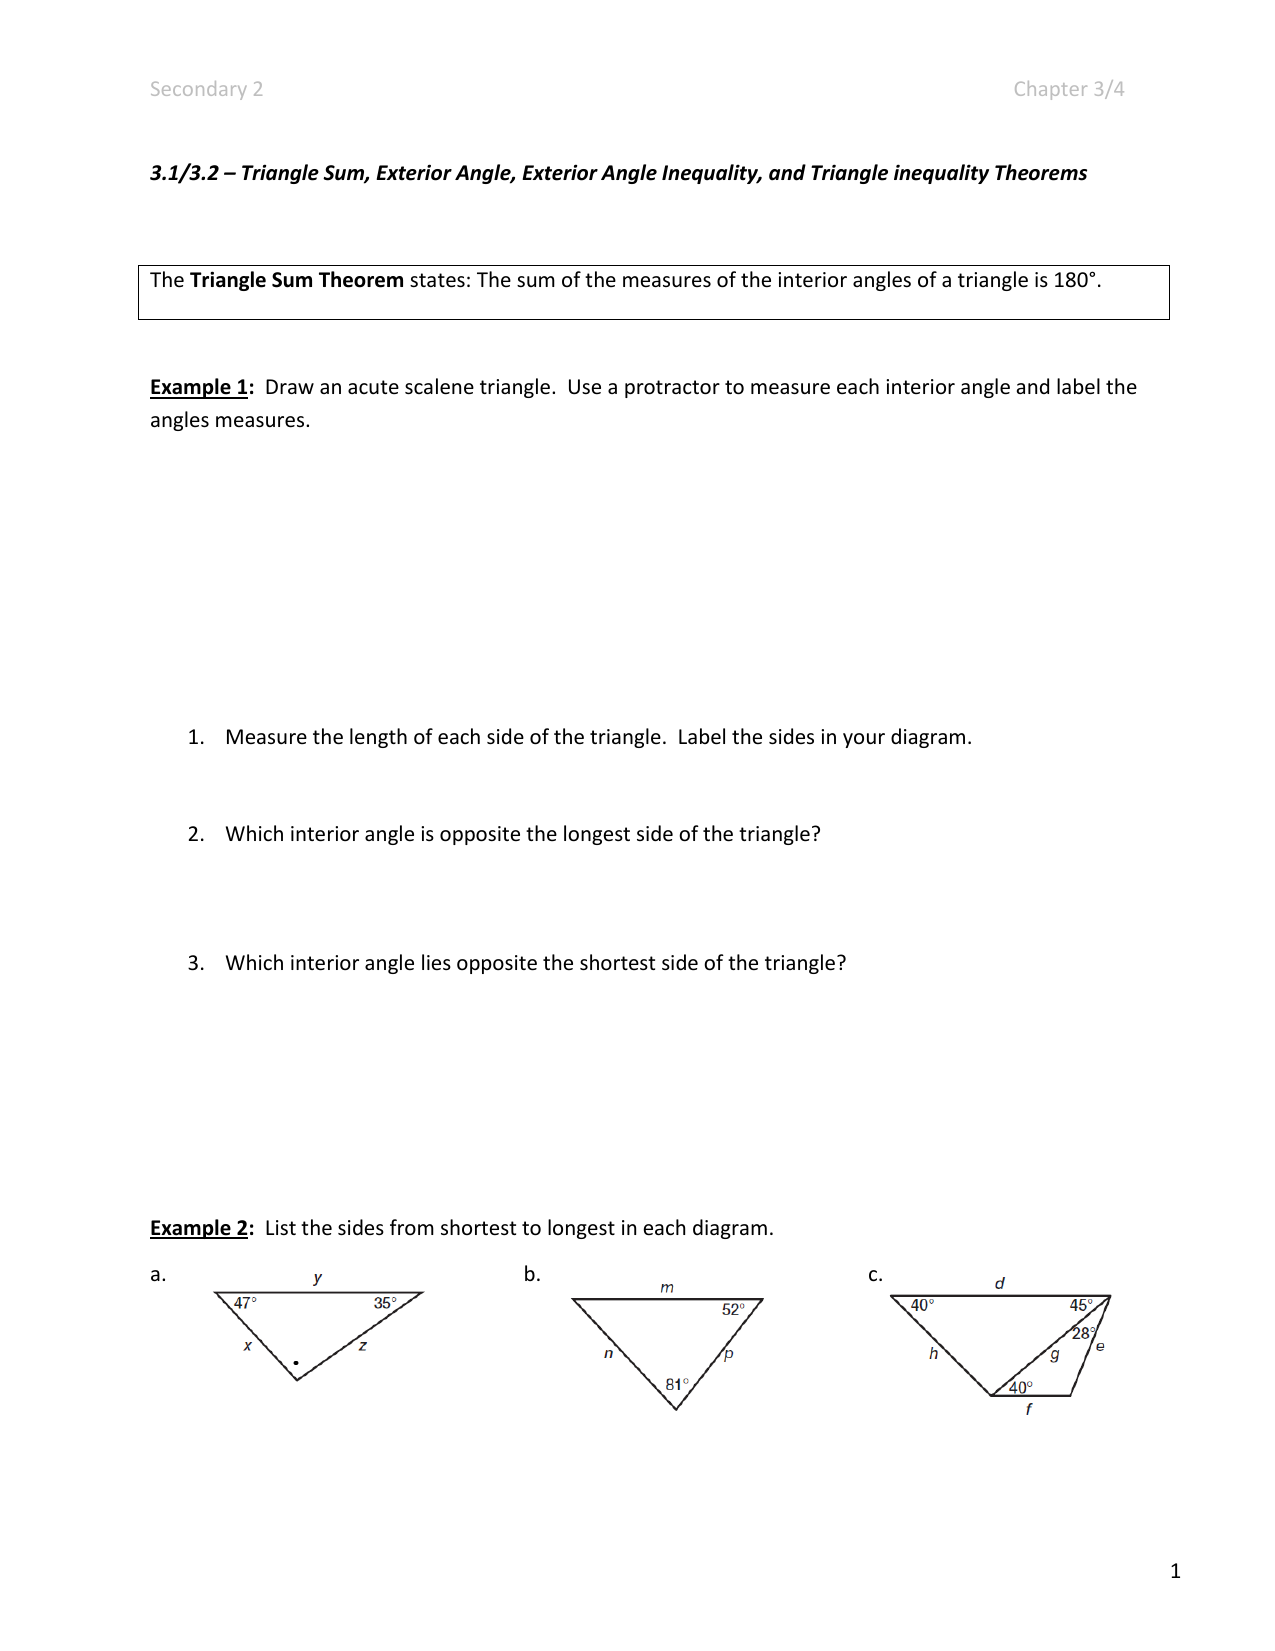 Secondary 2 Chapter 3 4 1 3 1 3 2 Triangle Sum Exterior Angle